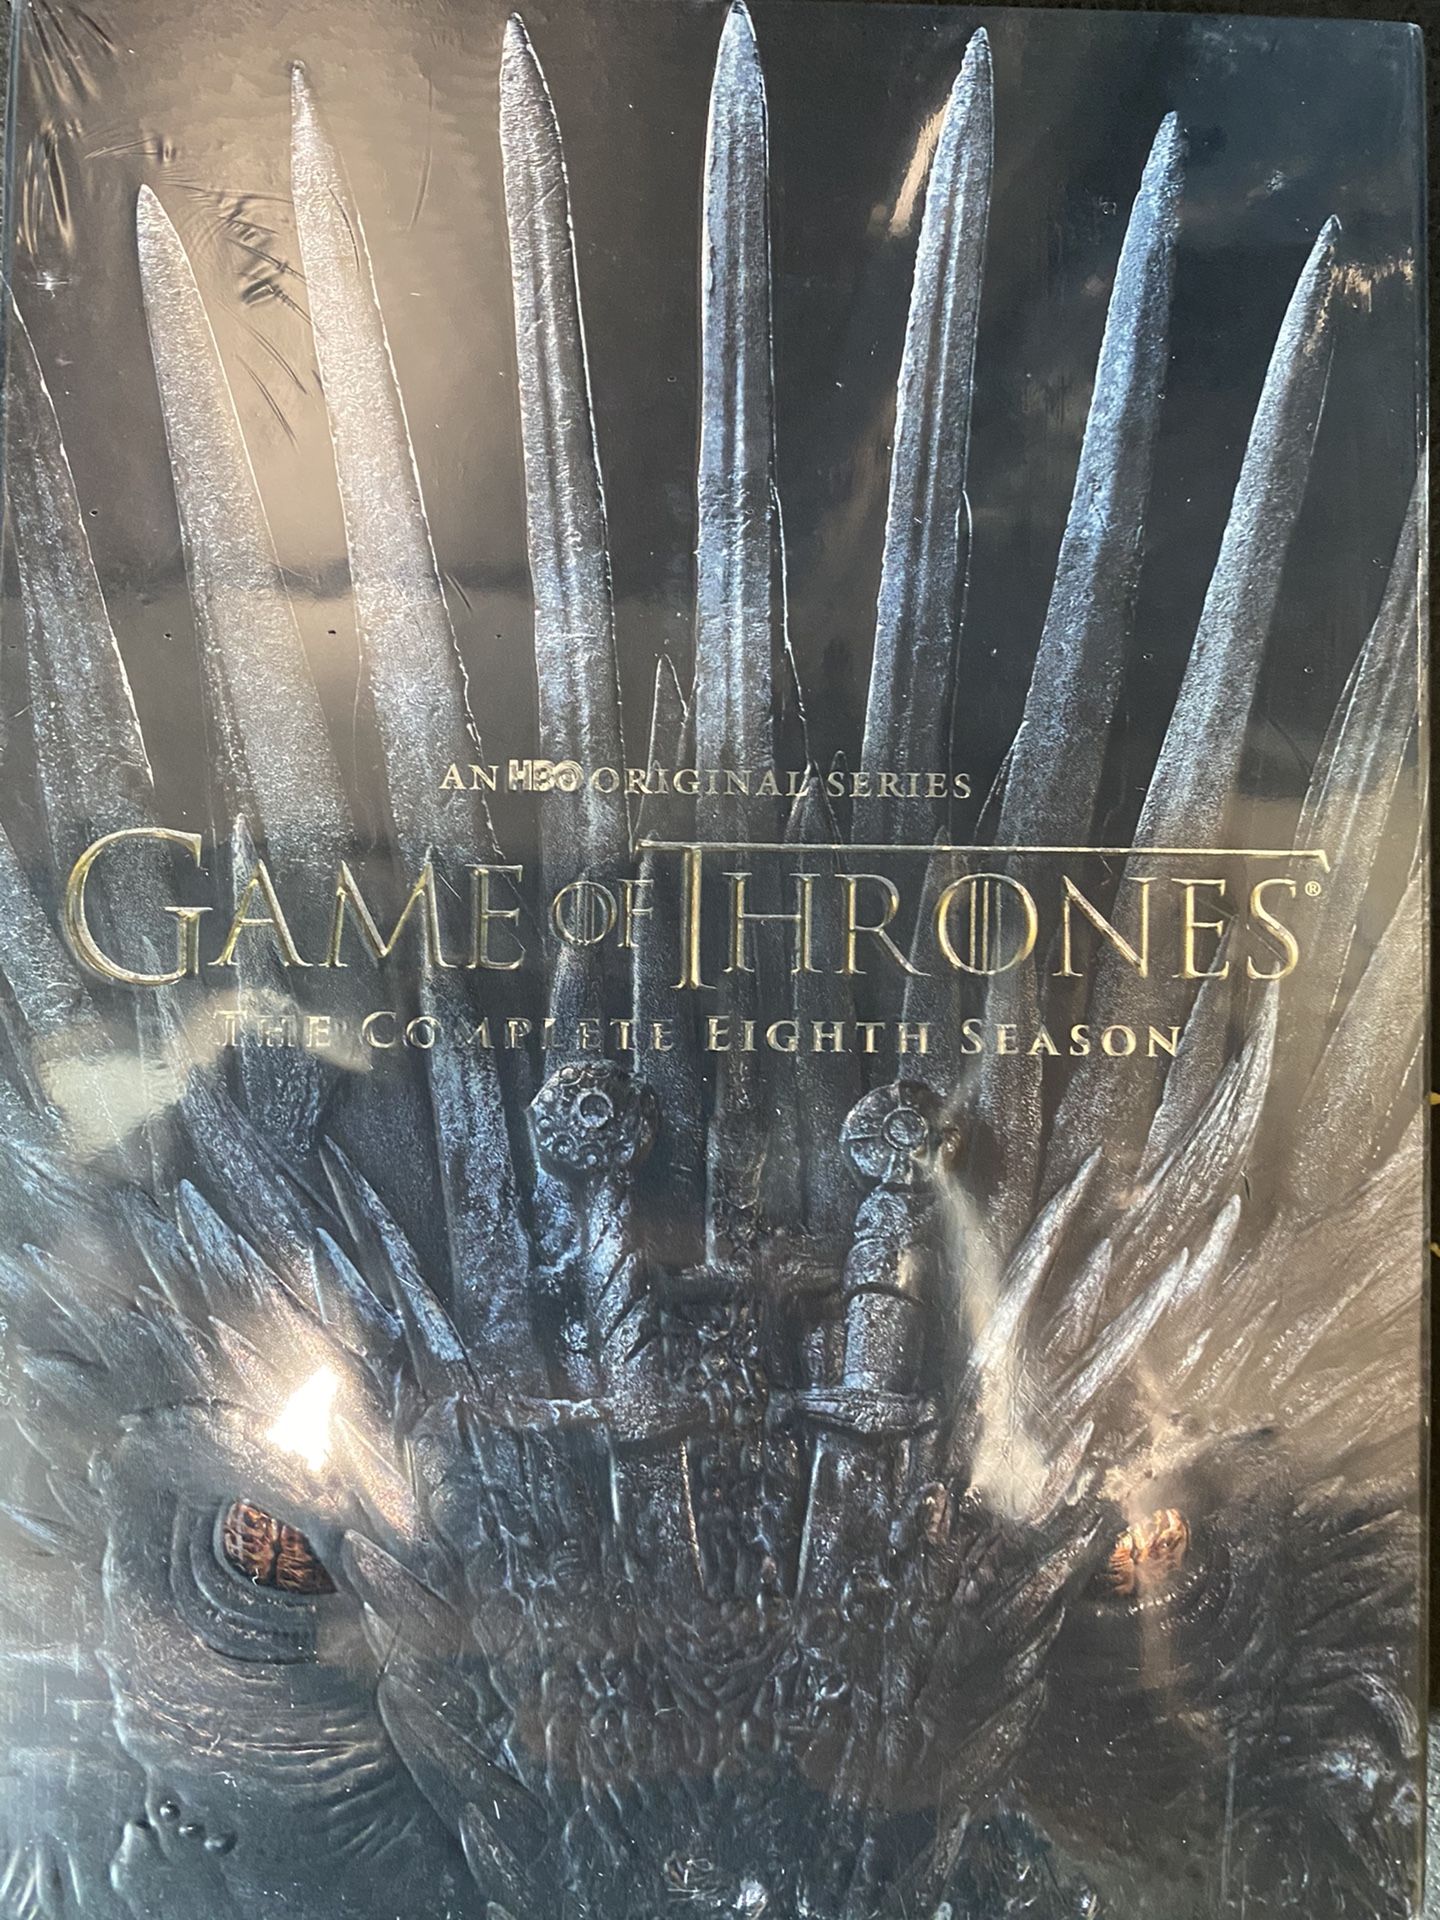 Game of thrones complete season 8 DVD